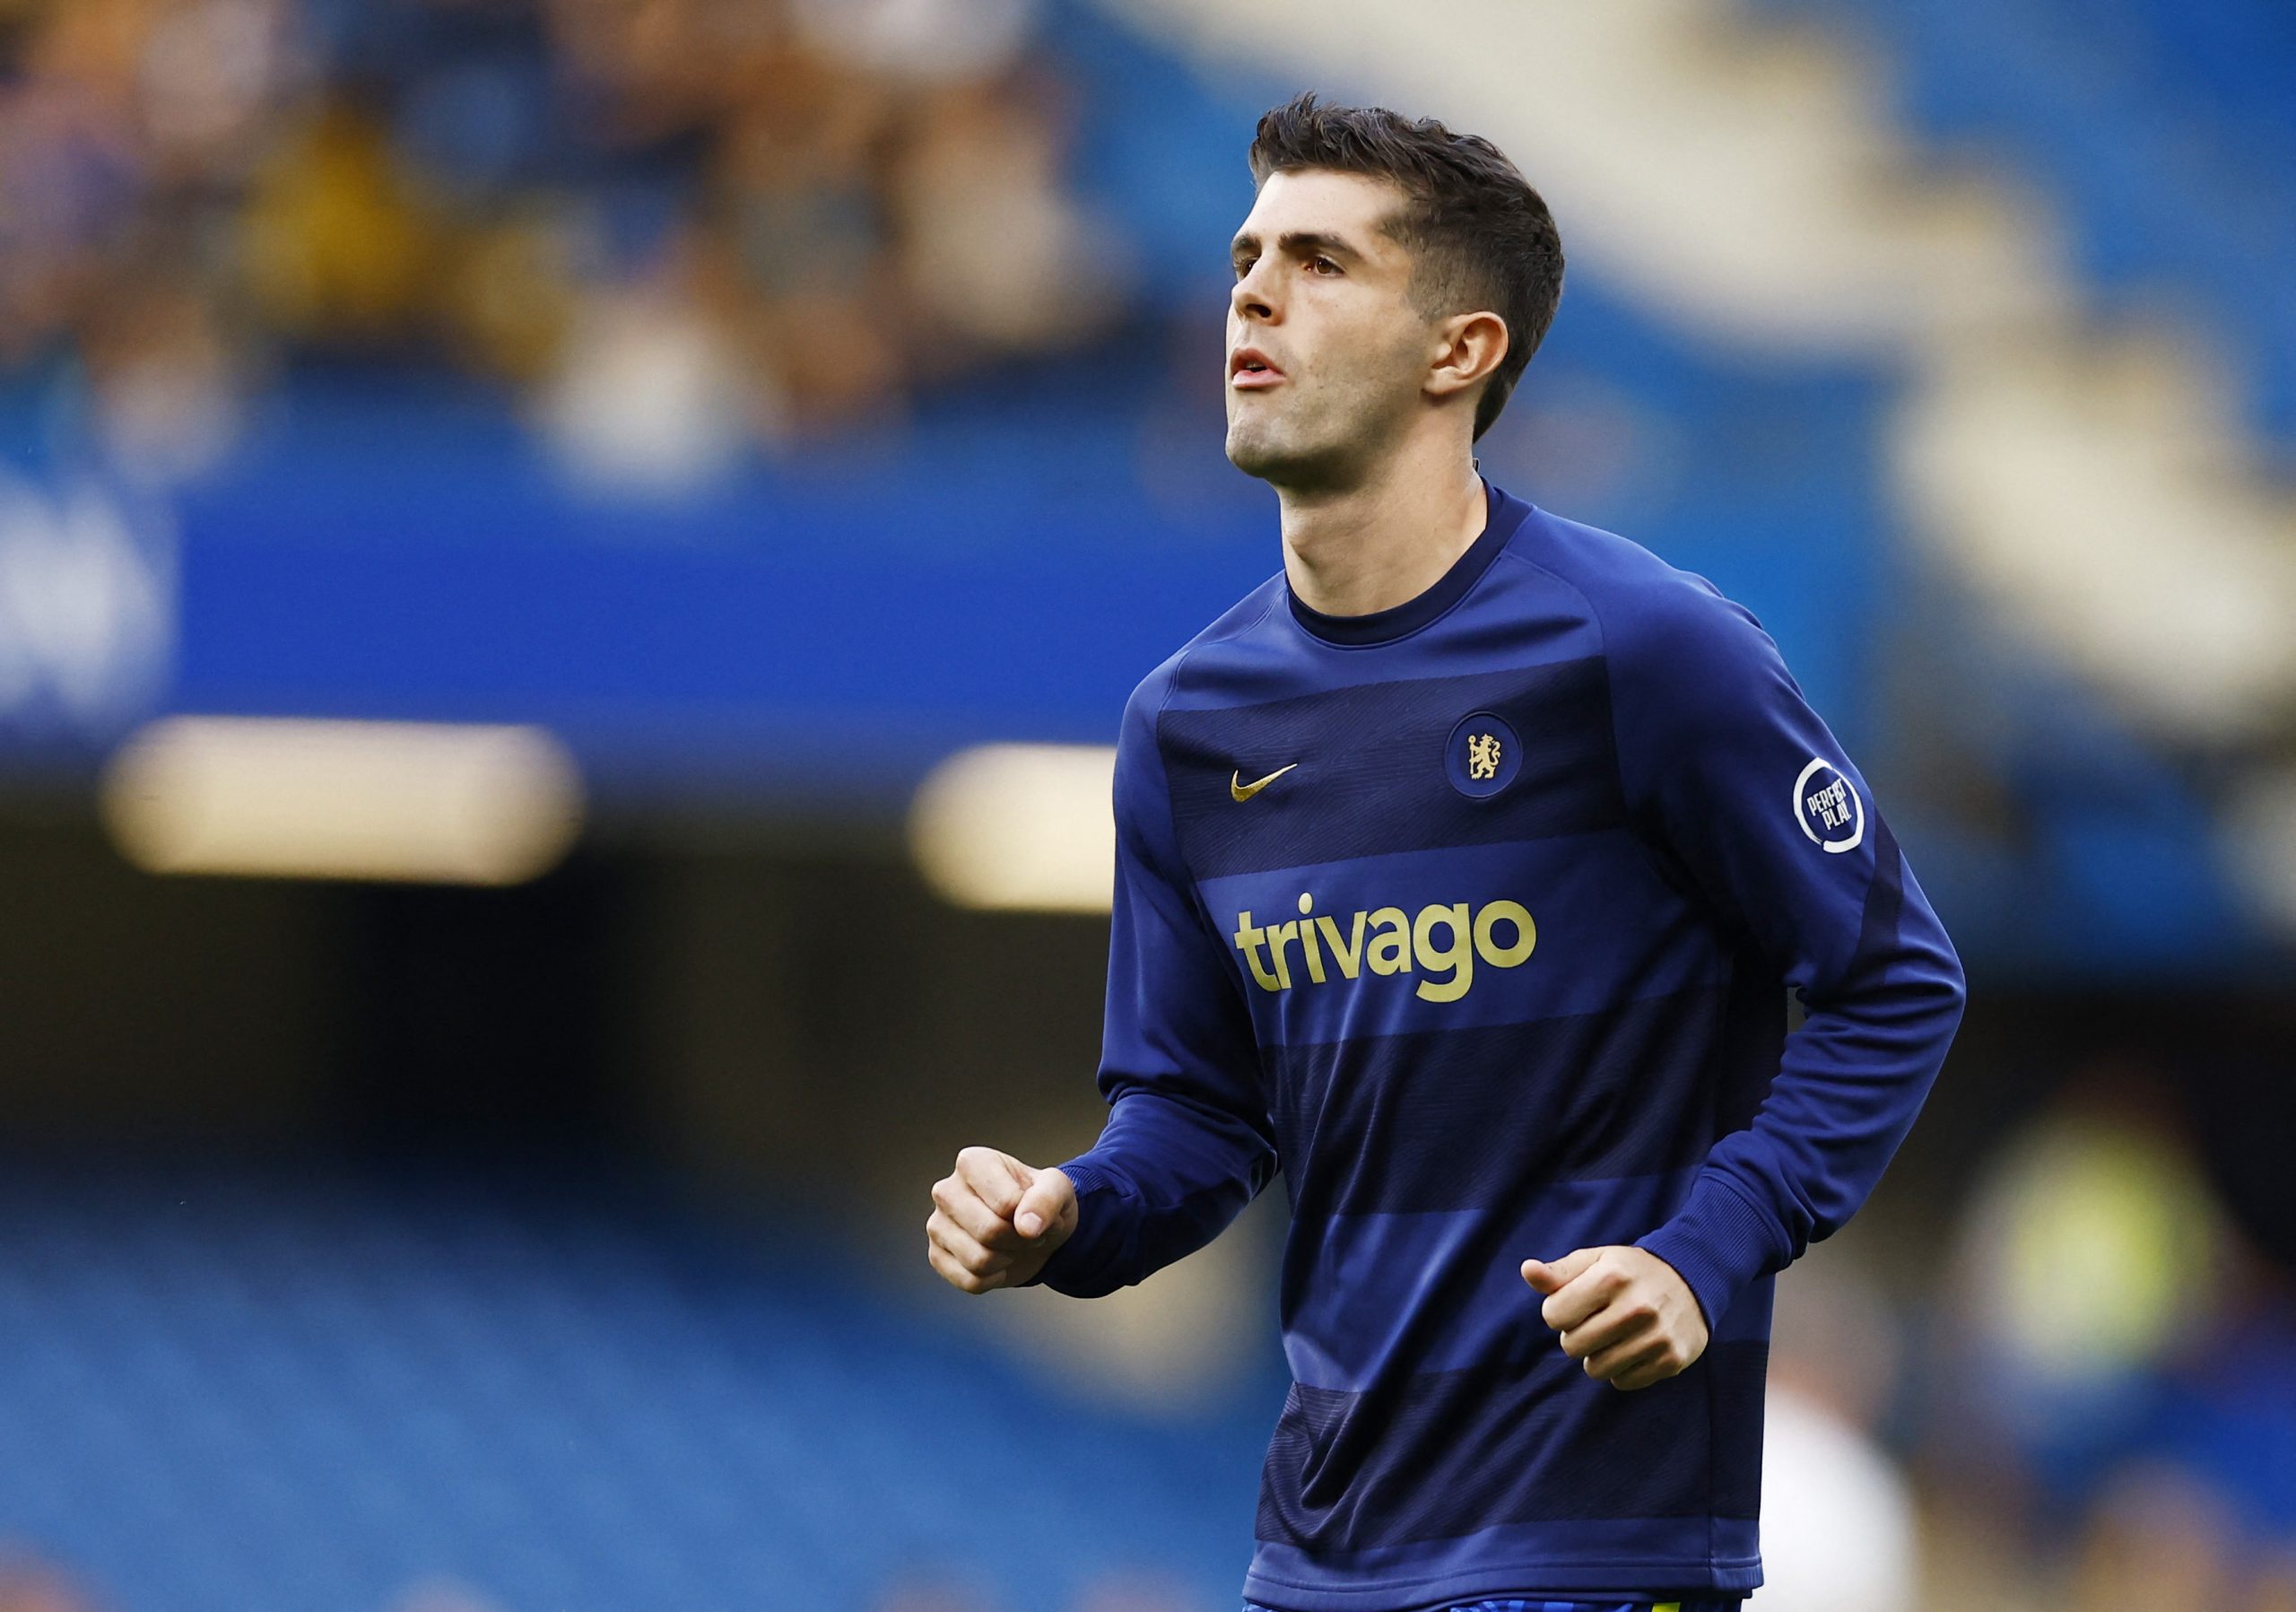 Chelsea-winger-Christian-Pulisic-warming-up-before-game-against-Leicester-City